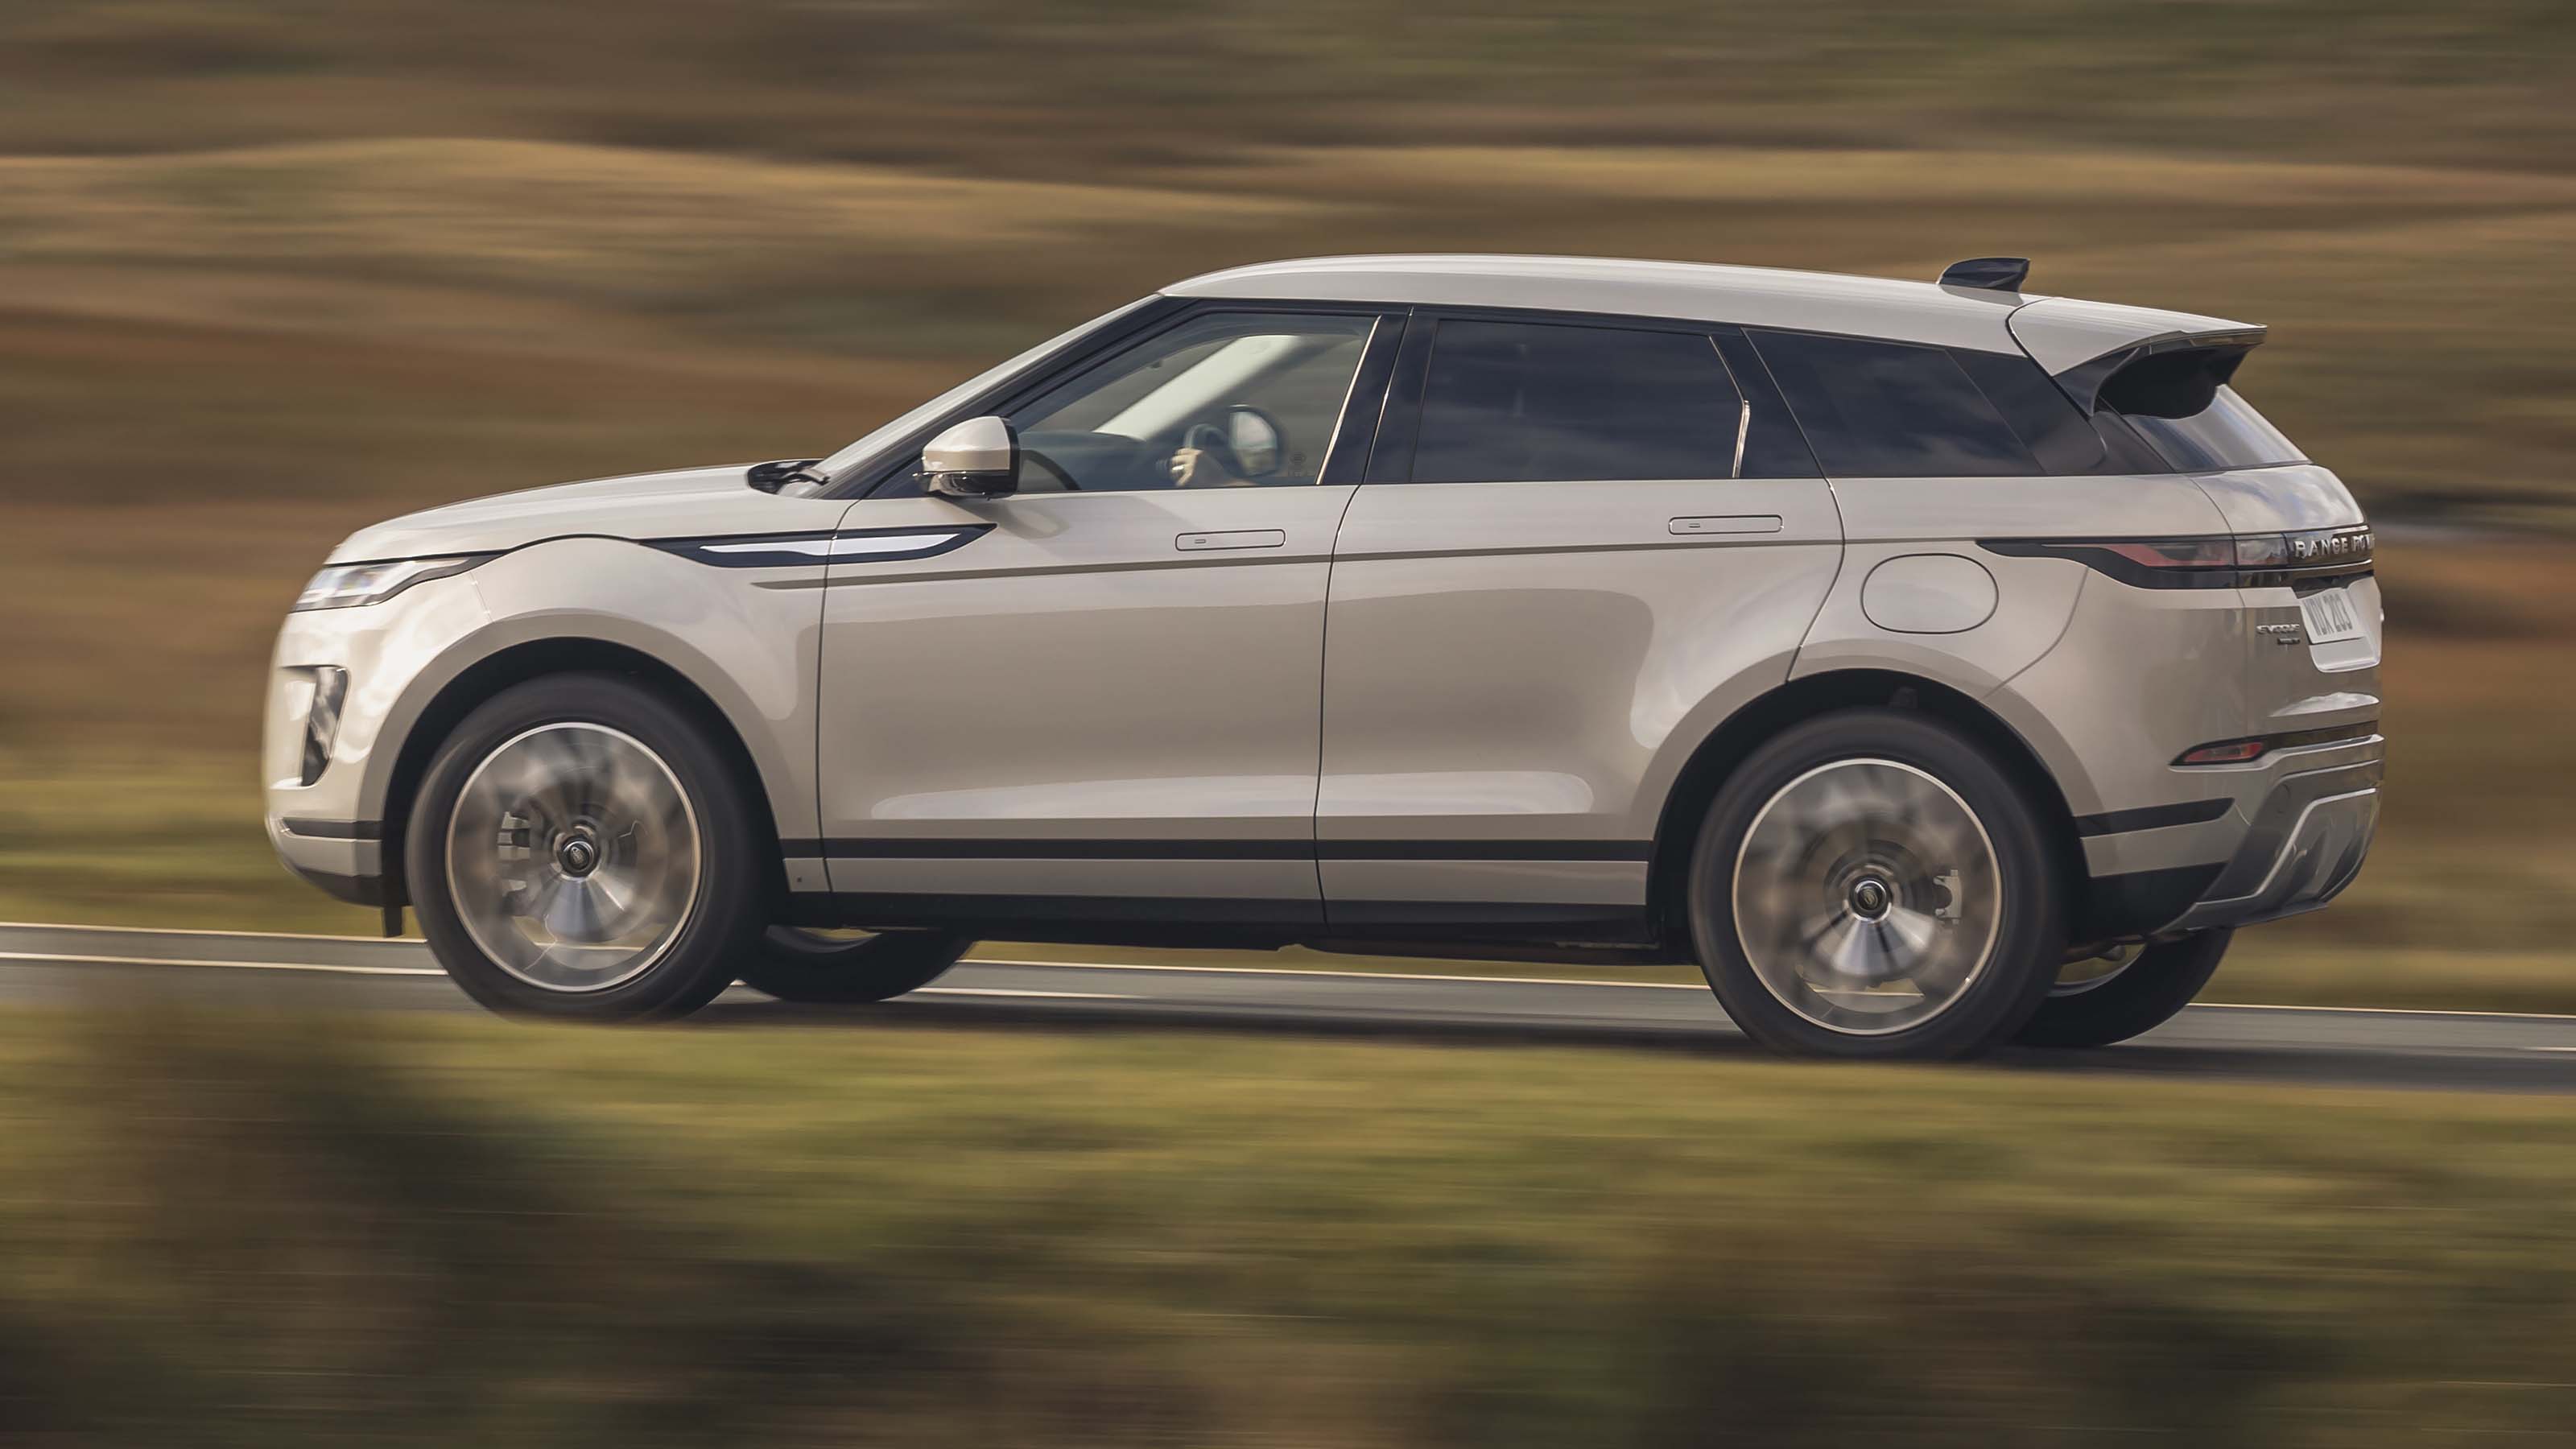 2022 Land Rover Range Rover Evoque Price, Value, Ratings & Reviews